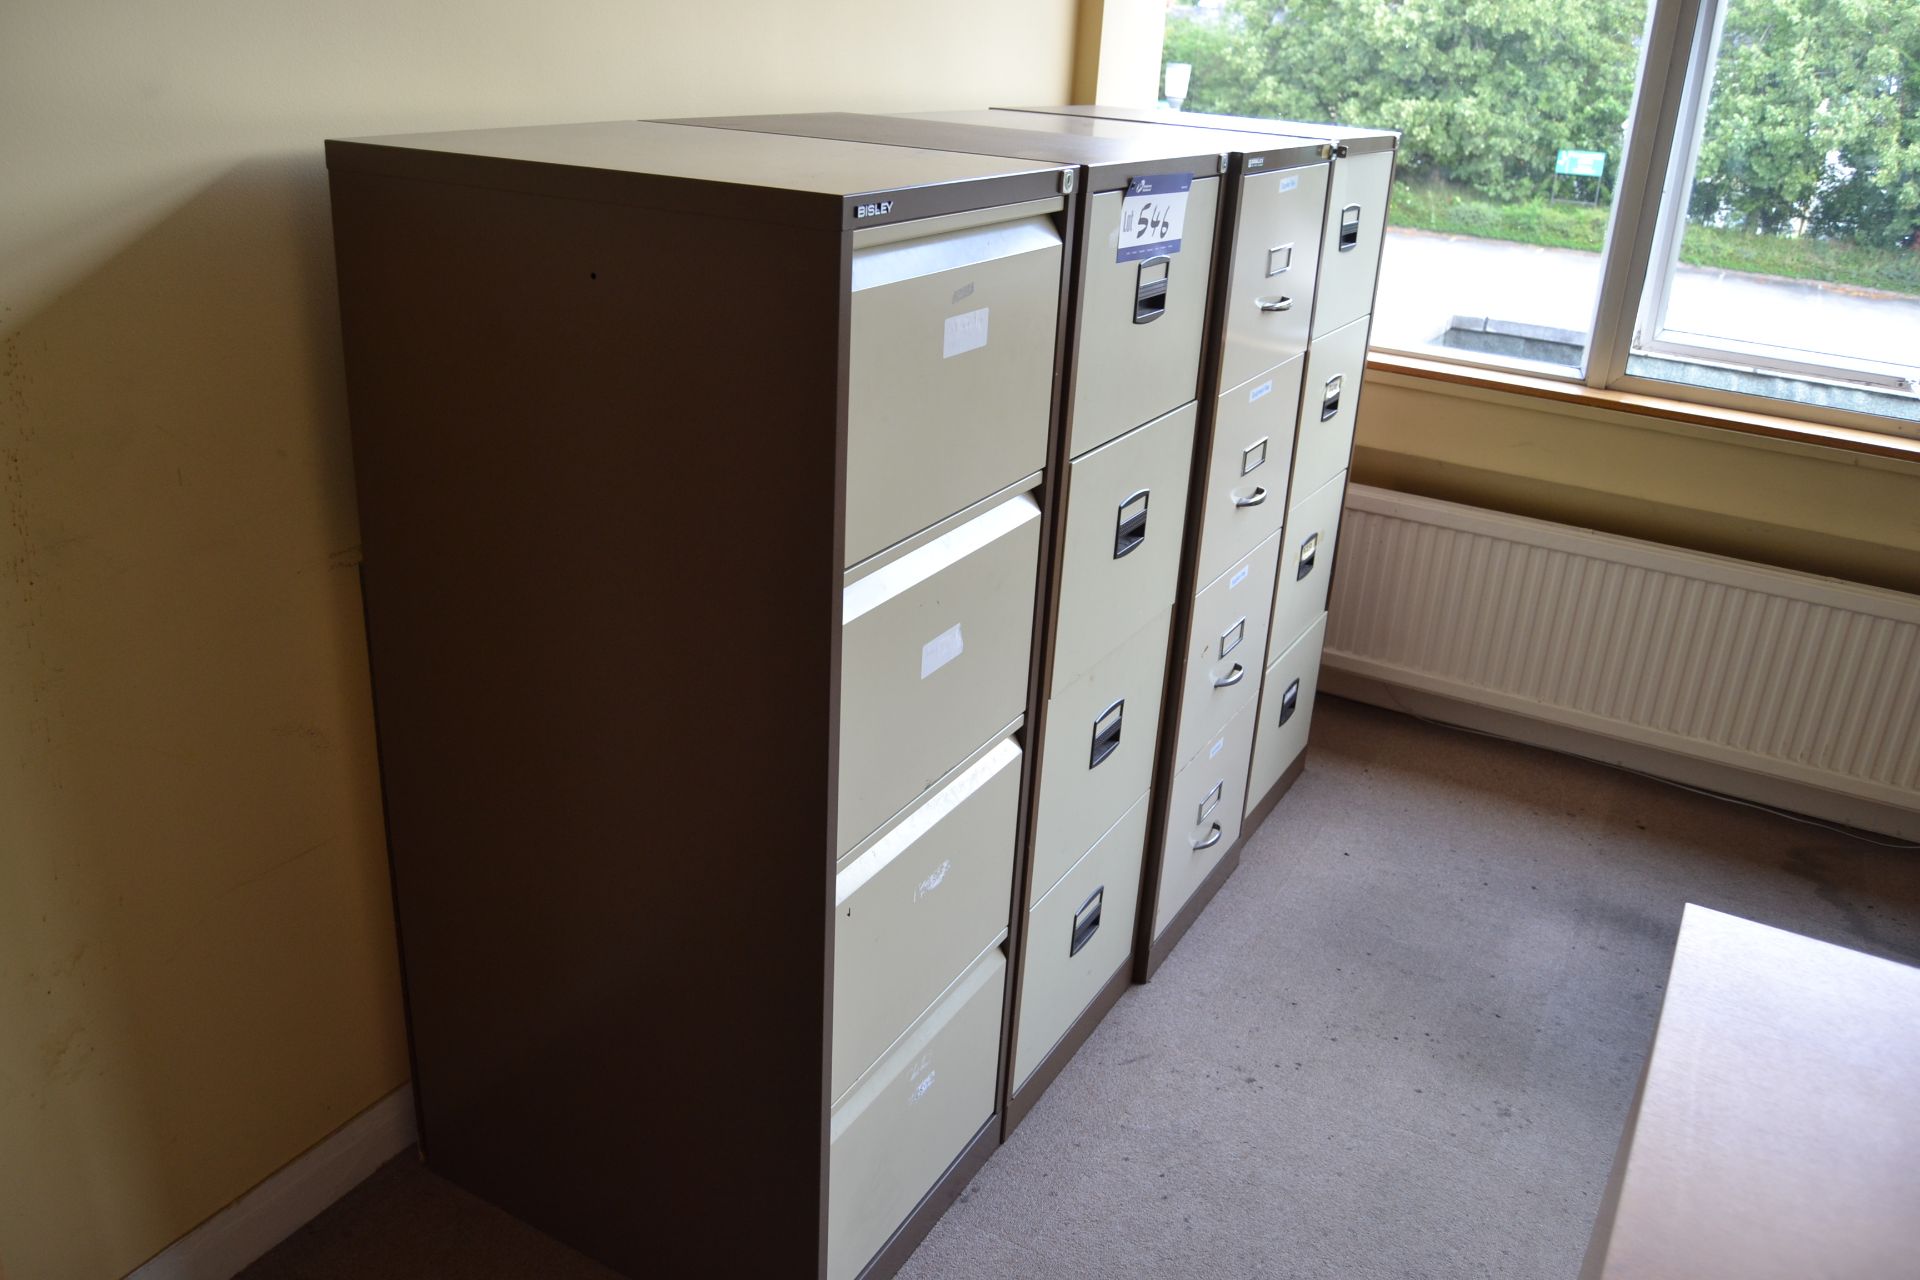 Four Steel Four Drawer Filing Cabinets